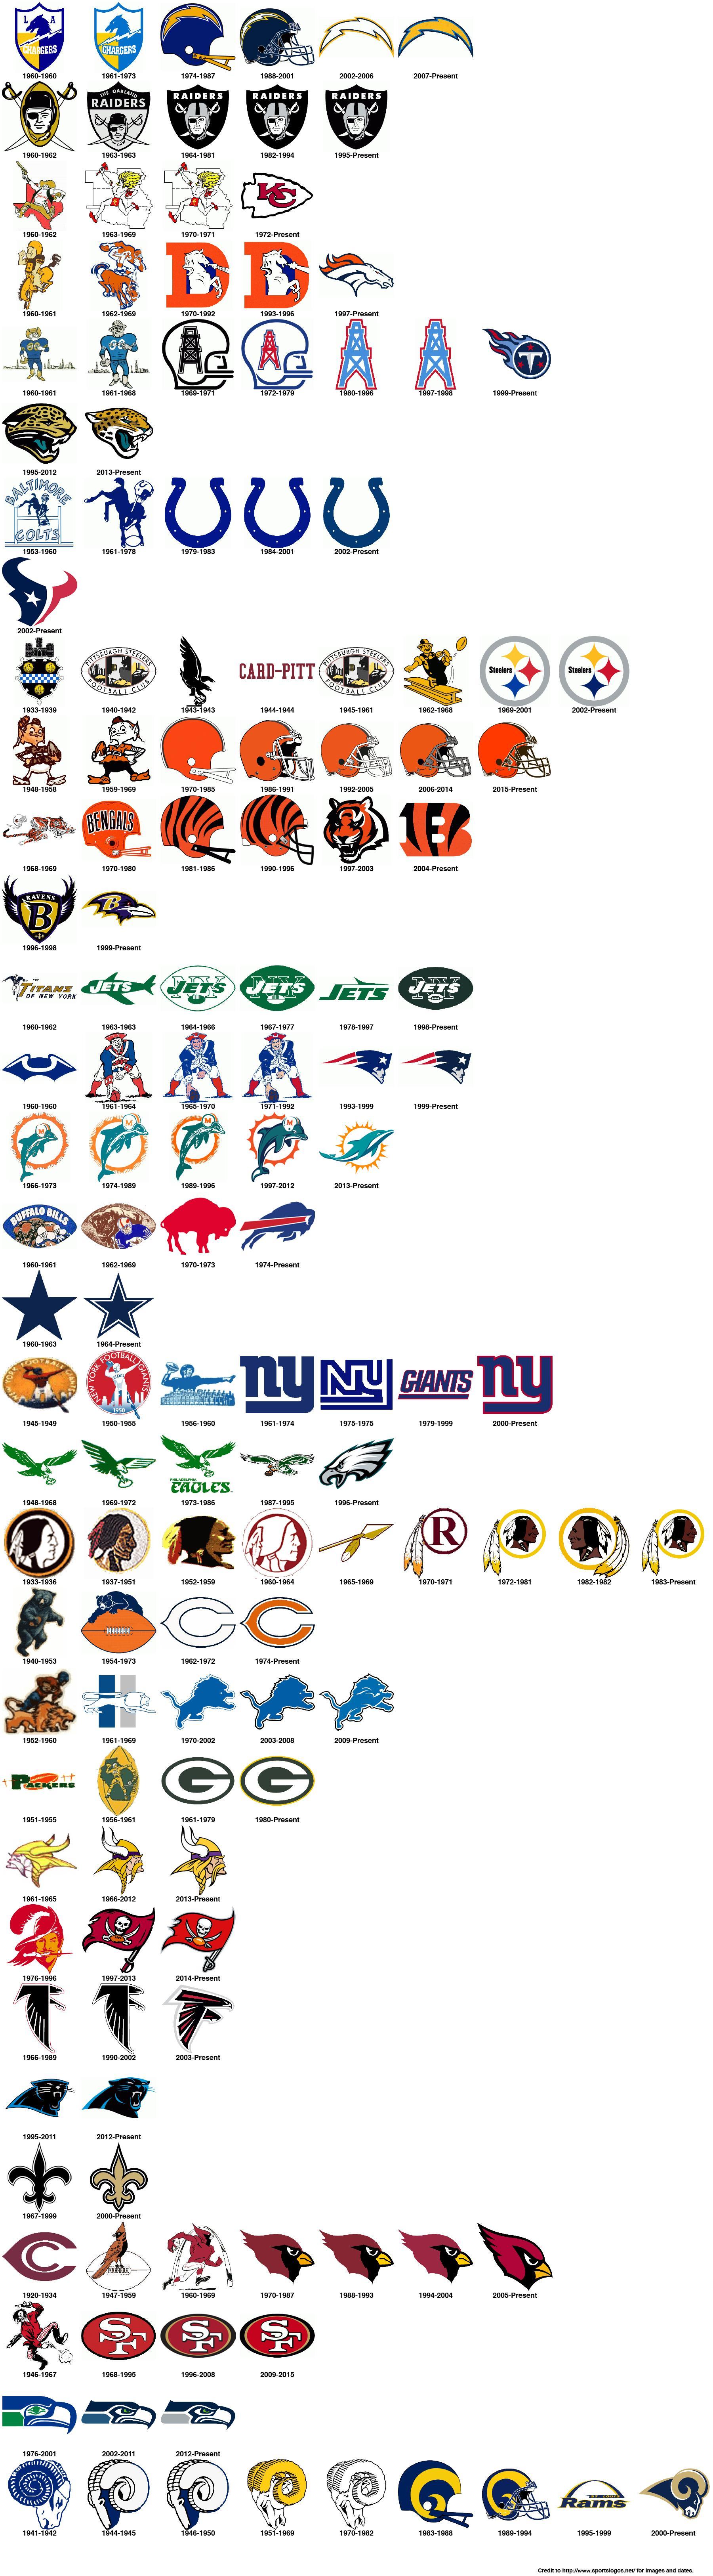 NFL Team Logo - NFL team logo changes throughout the their history